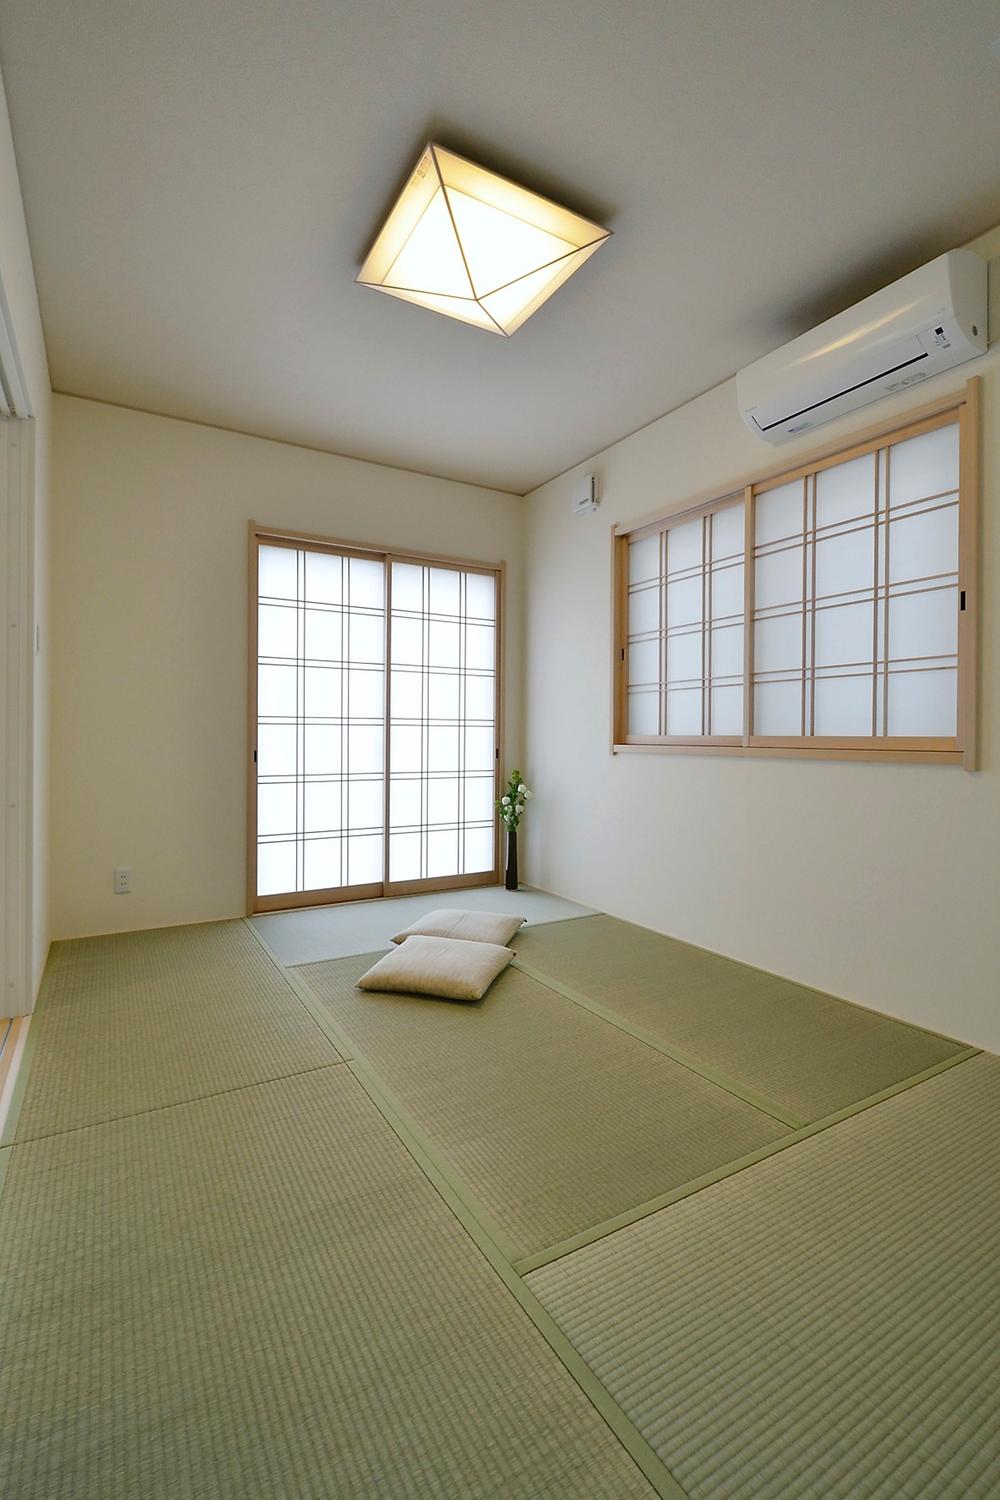 Non-living room. As an extension of the living room, As roomsese-style room that can be used for multi-purpose. When there is, it is convenient person room. (Model house shooting)